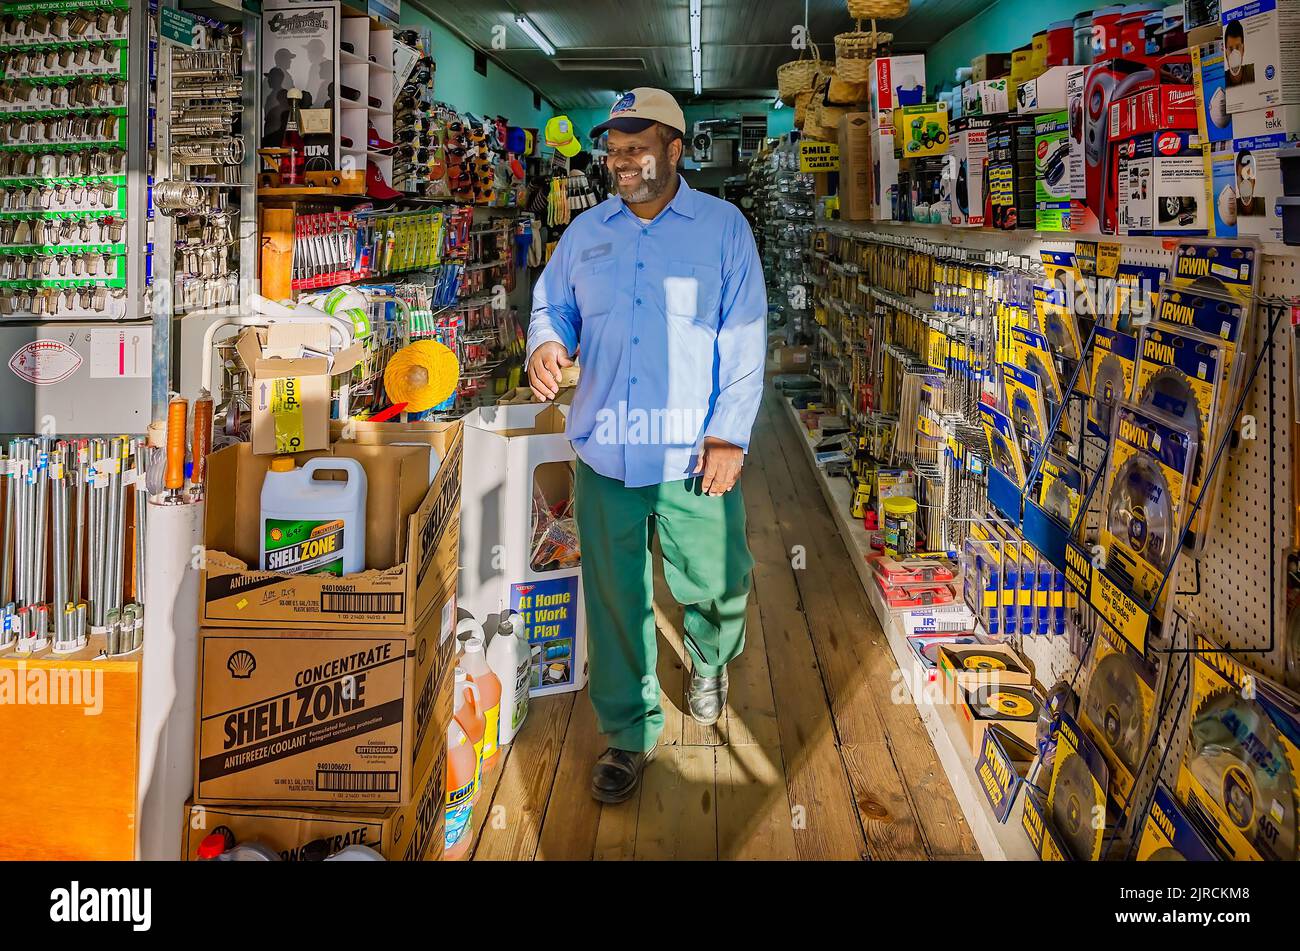 An African-American man shops in Booker Hardware & Cutlery, an old-fashioned hardware store, Oct. 10, 2011, in Holly Springs, Mississippi. Stock Photo